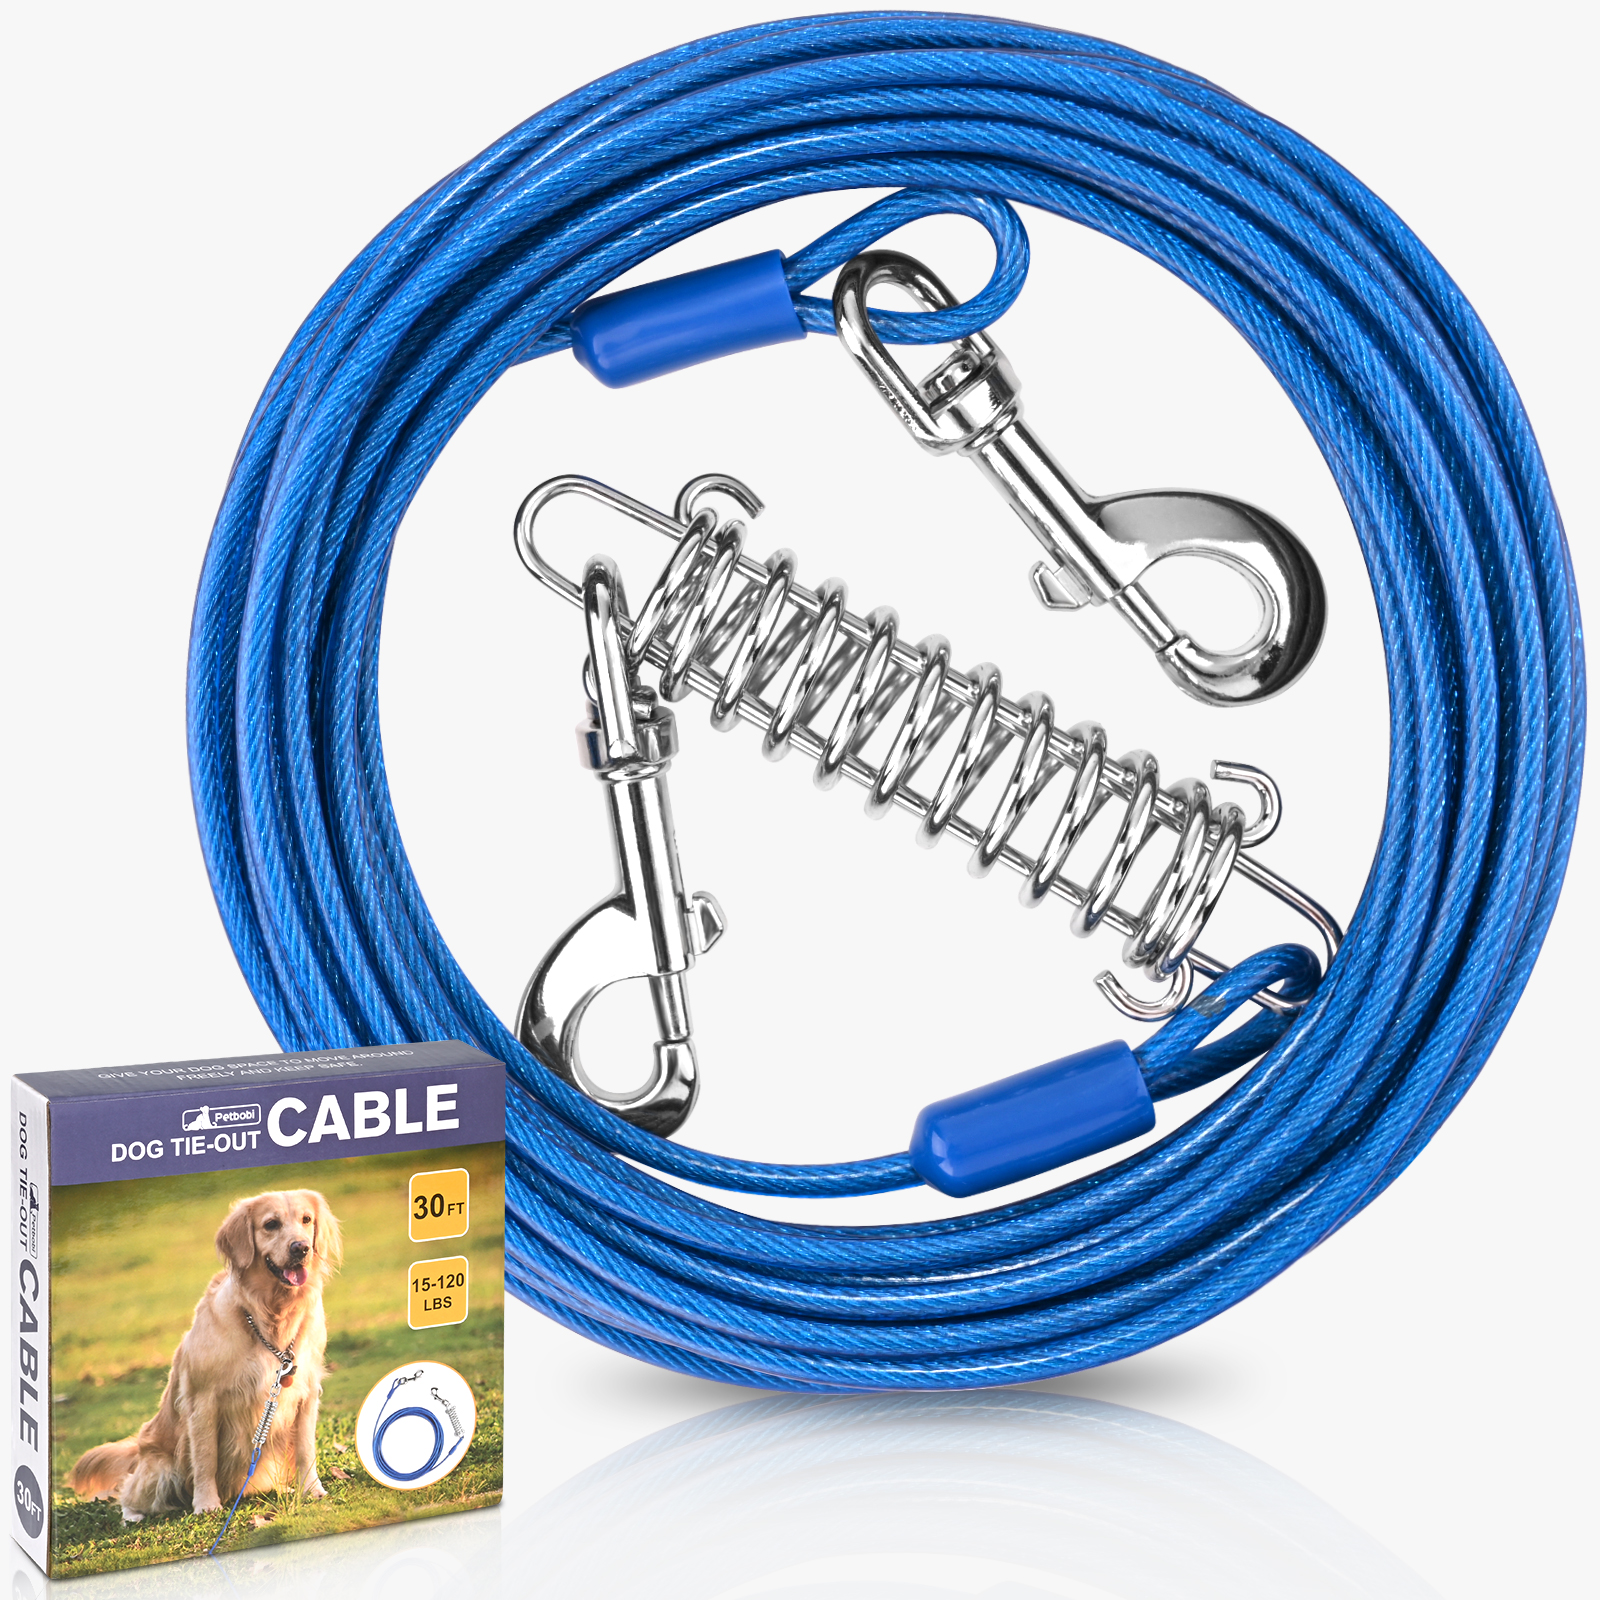 Dog Tie-Out Cable Set - 30ft/120lbs